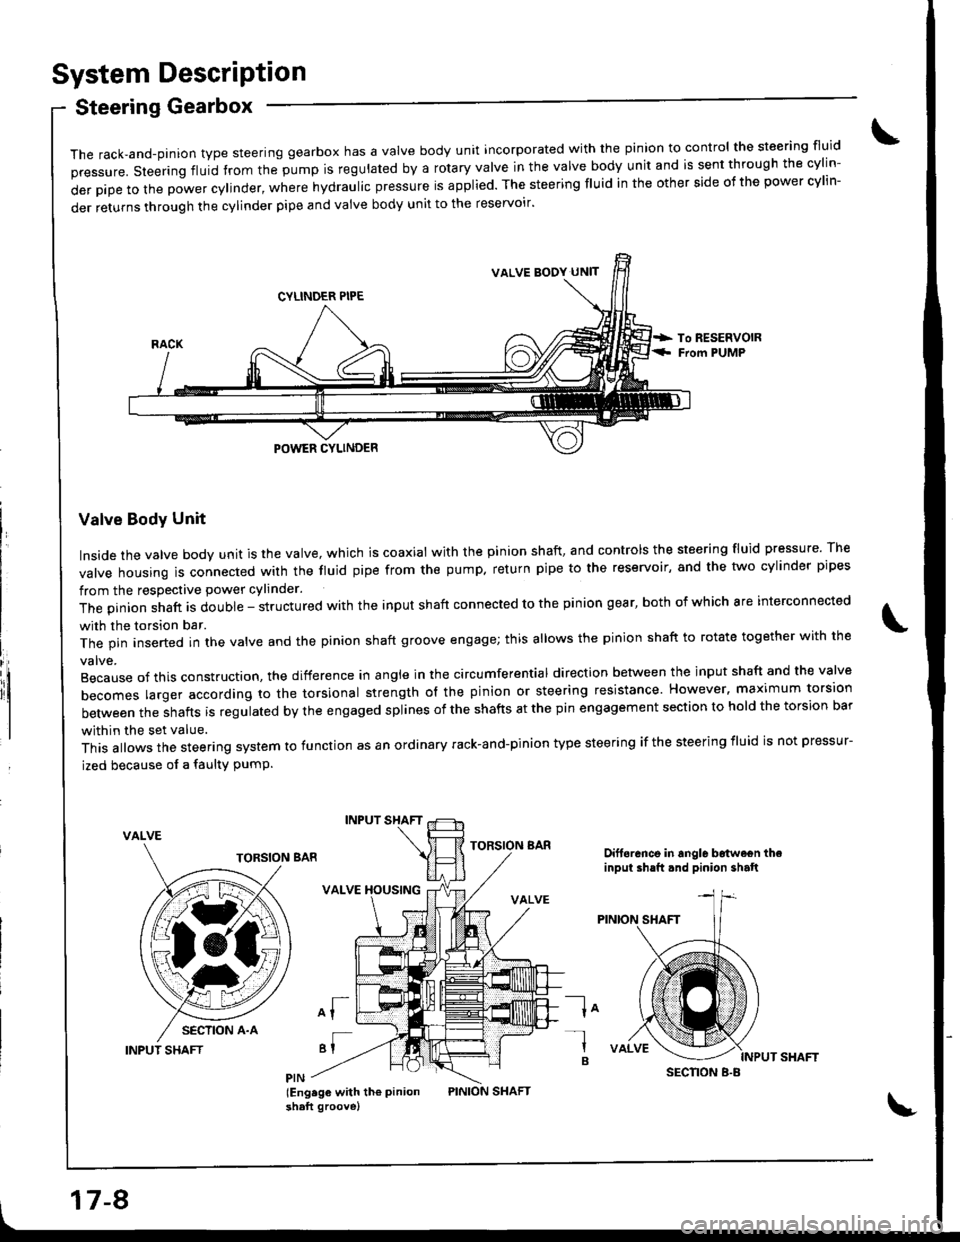 HONDA INTEGRA 1998 4.G User Guide System DescriPtion
Steering Gearbox
it
The rack,and-pinion type steering gearbox has a Valve body unit incorporated with the pinion to control the steering fluid
pressure. steering fluid from the pump